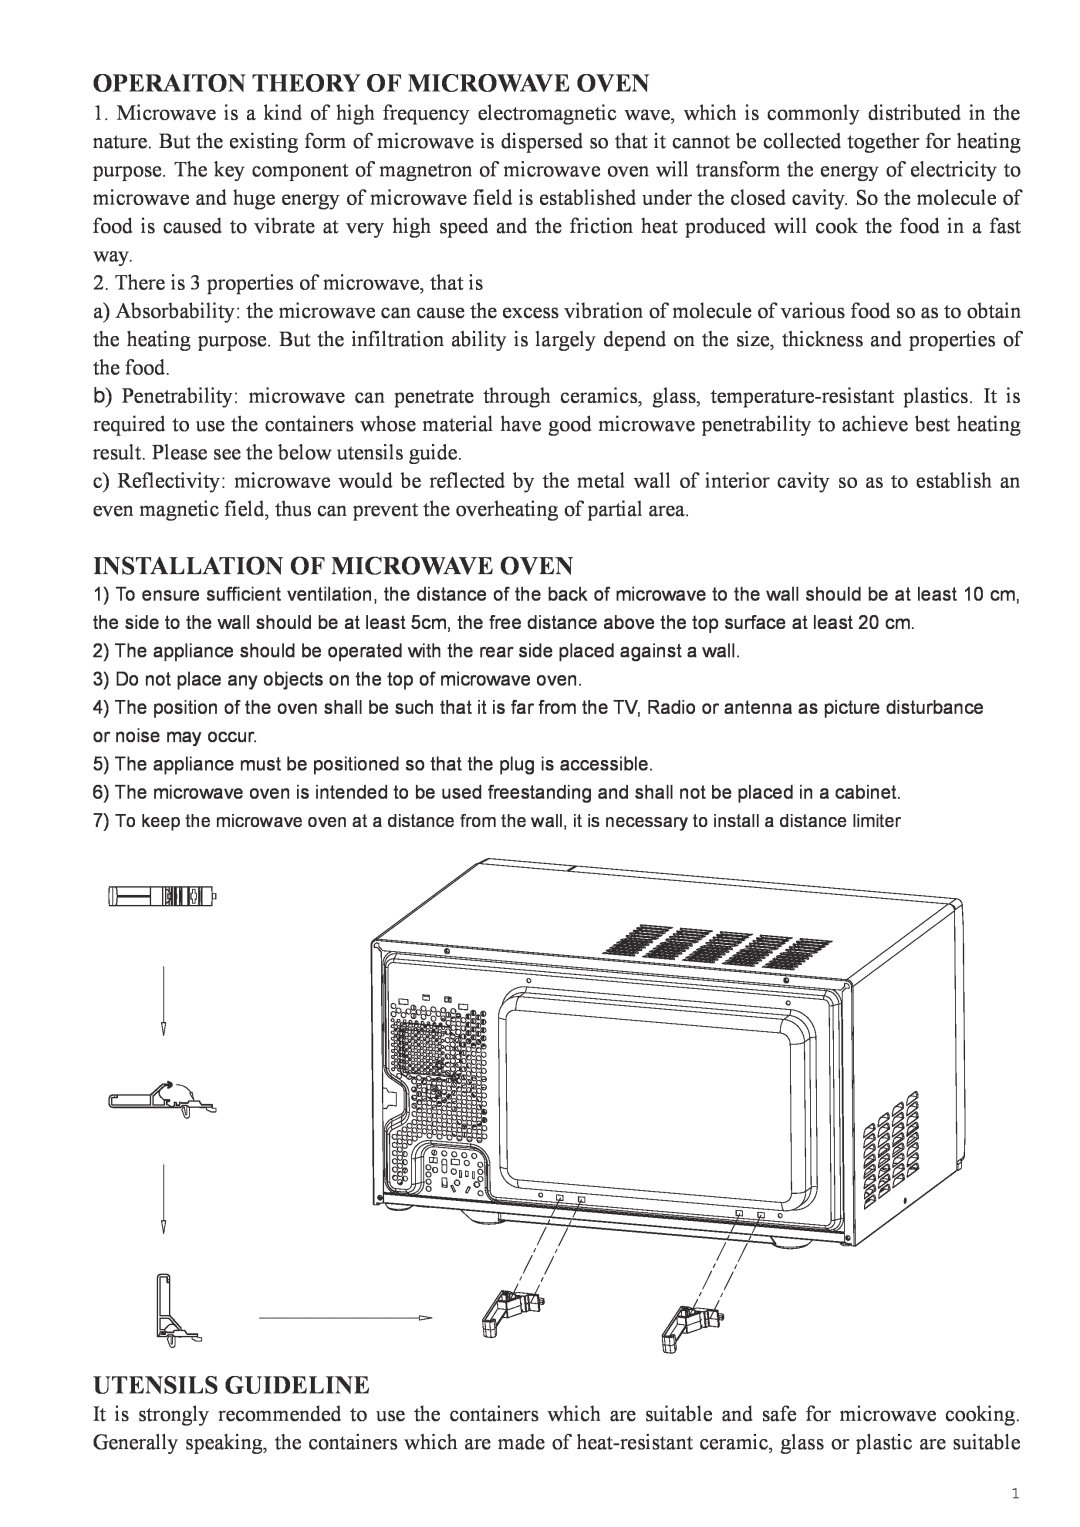 Haier HDN-2380EG manual Operaiton Theory Of Microwave Oven, Installation Of Microwave Oven, Utensils Guideline 